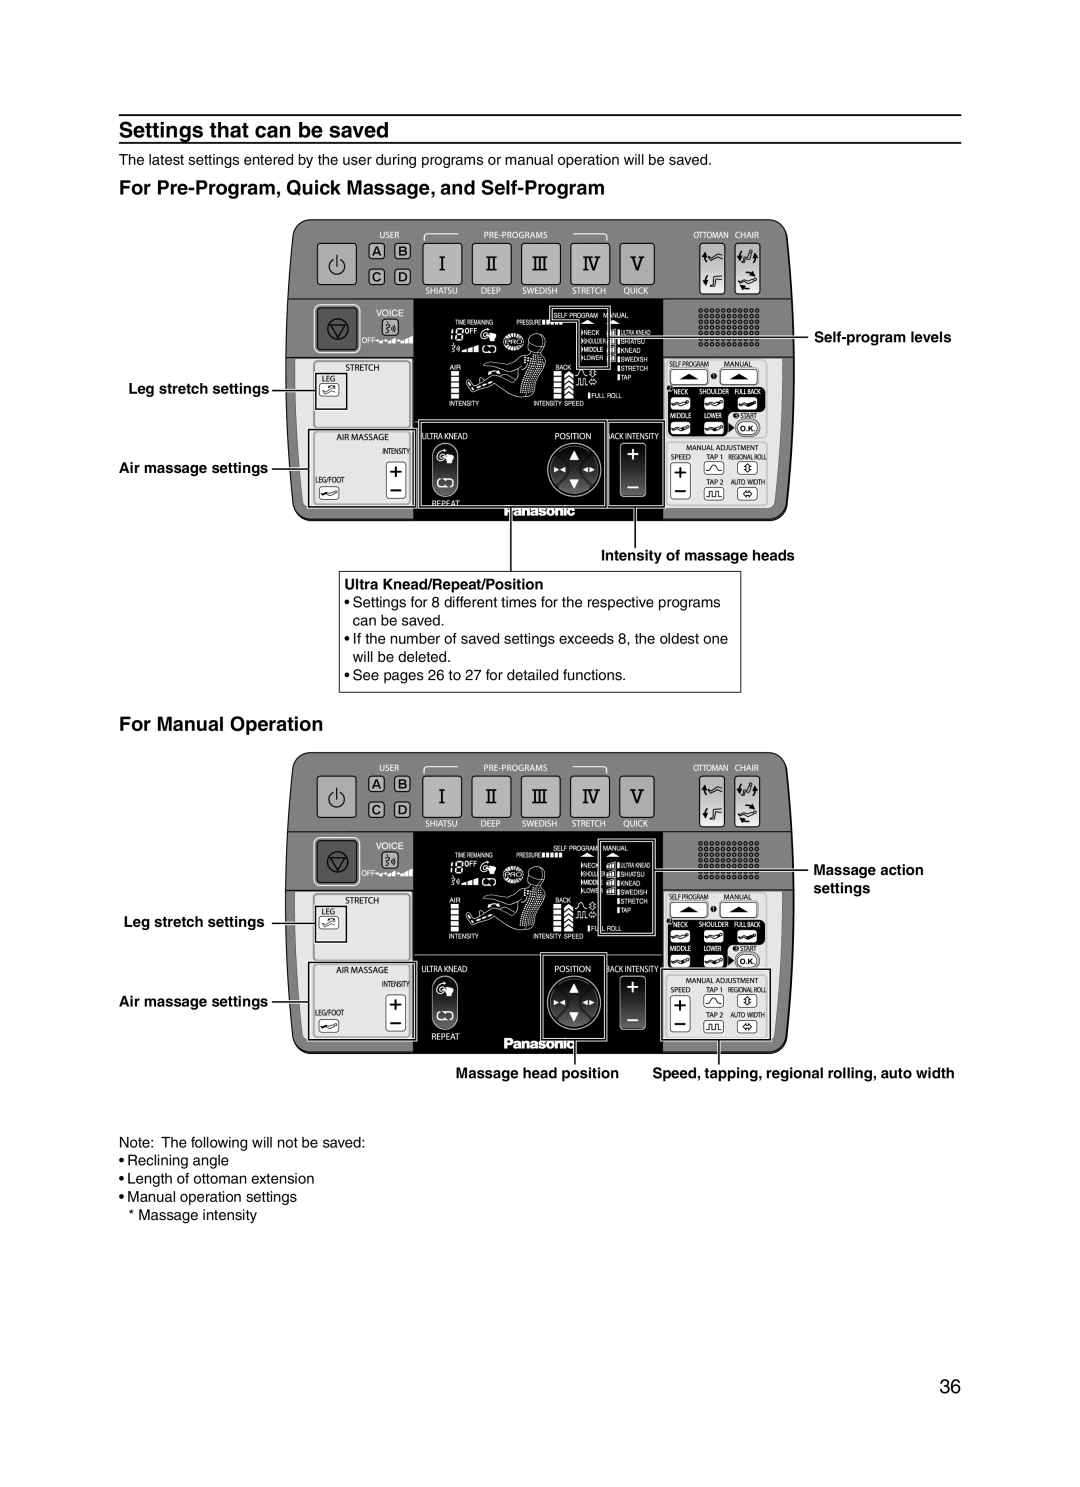 Panasonic 30003 manual Settings that can be saved, For Pre-Program,Quick Massage, and Self-Program, For Manual Operation 